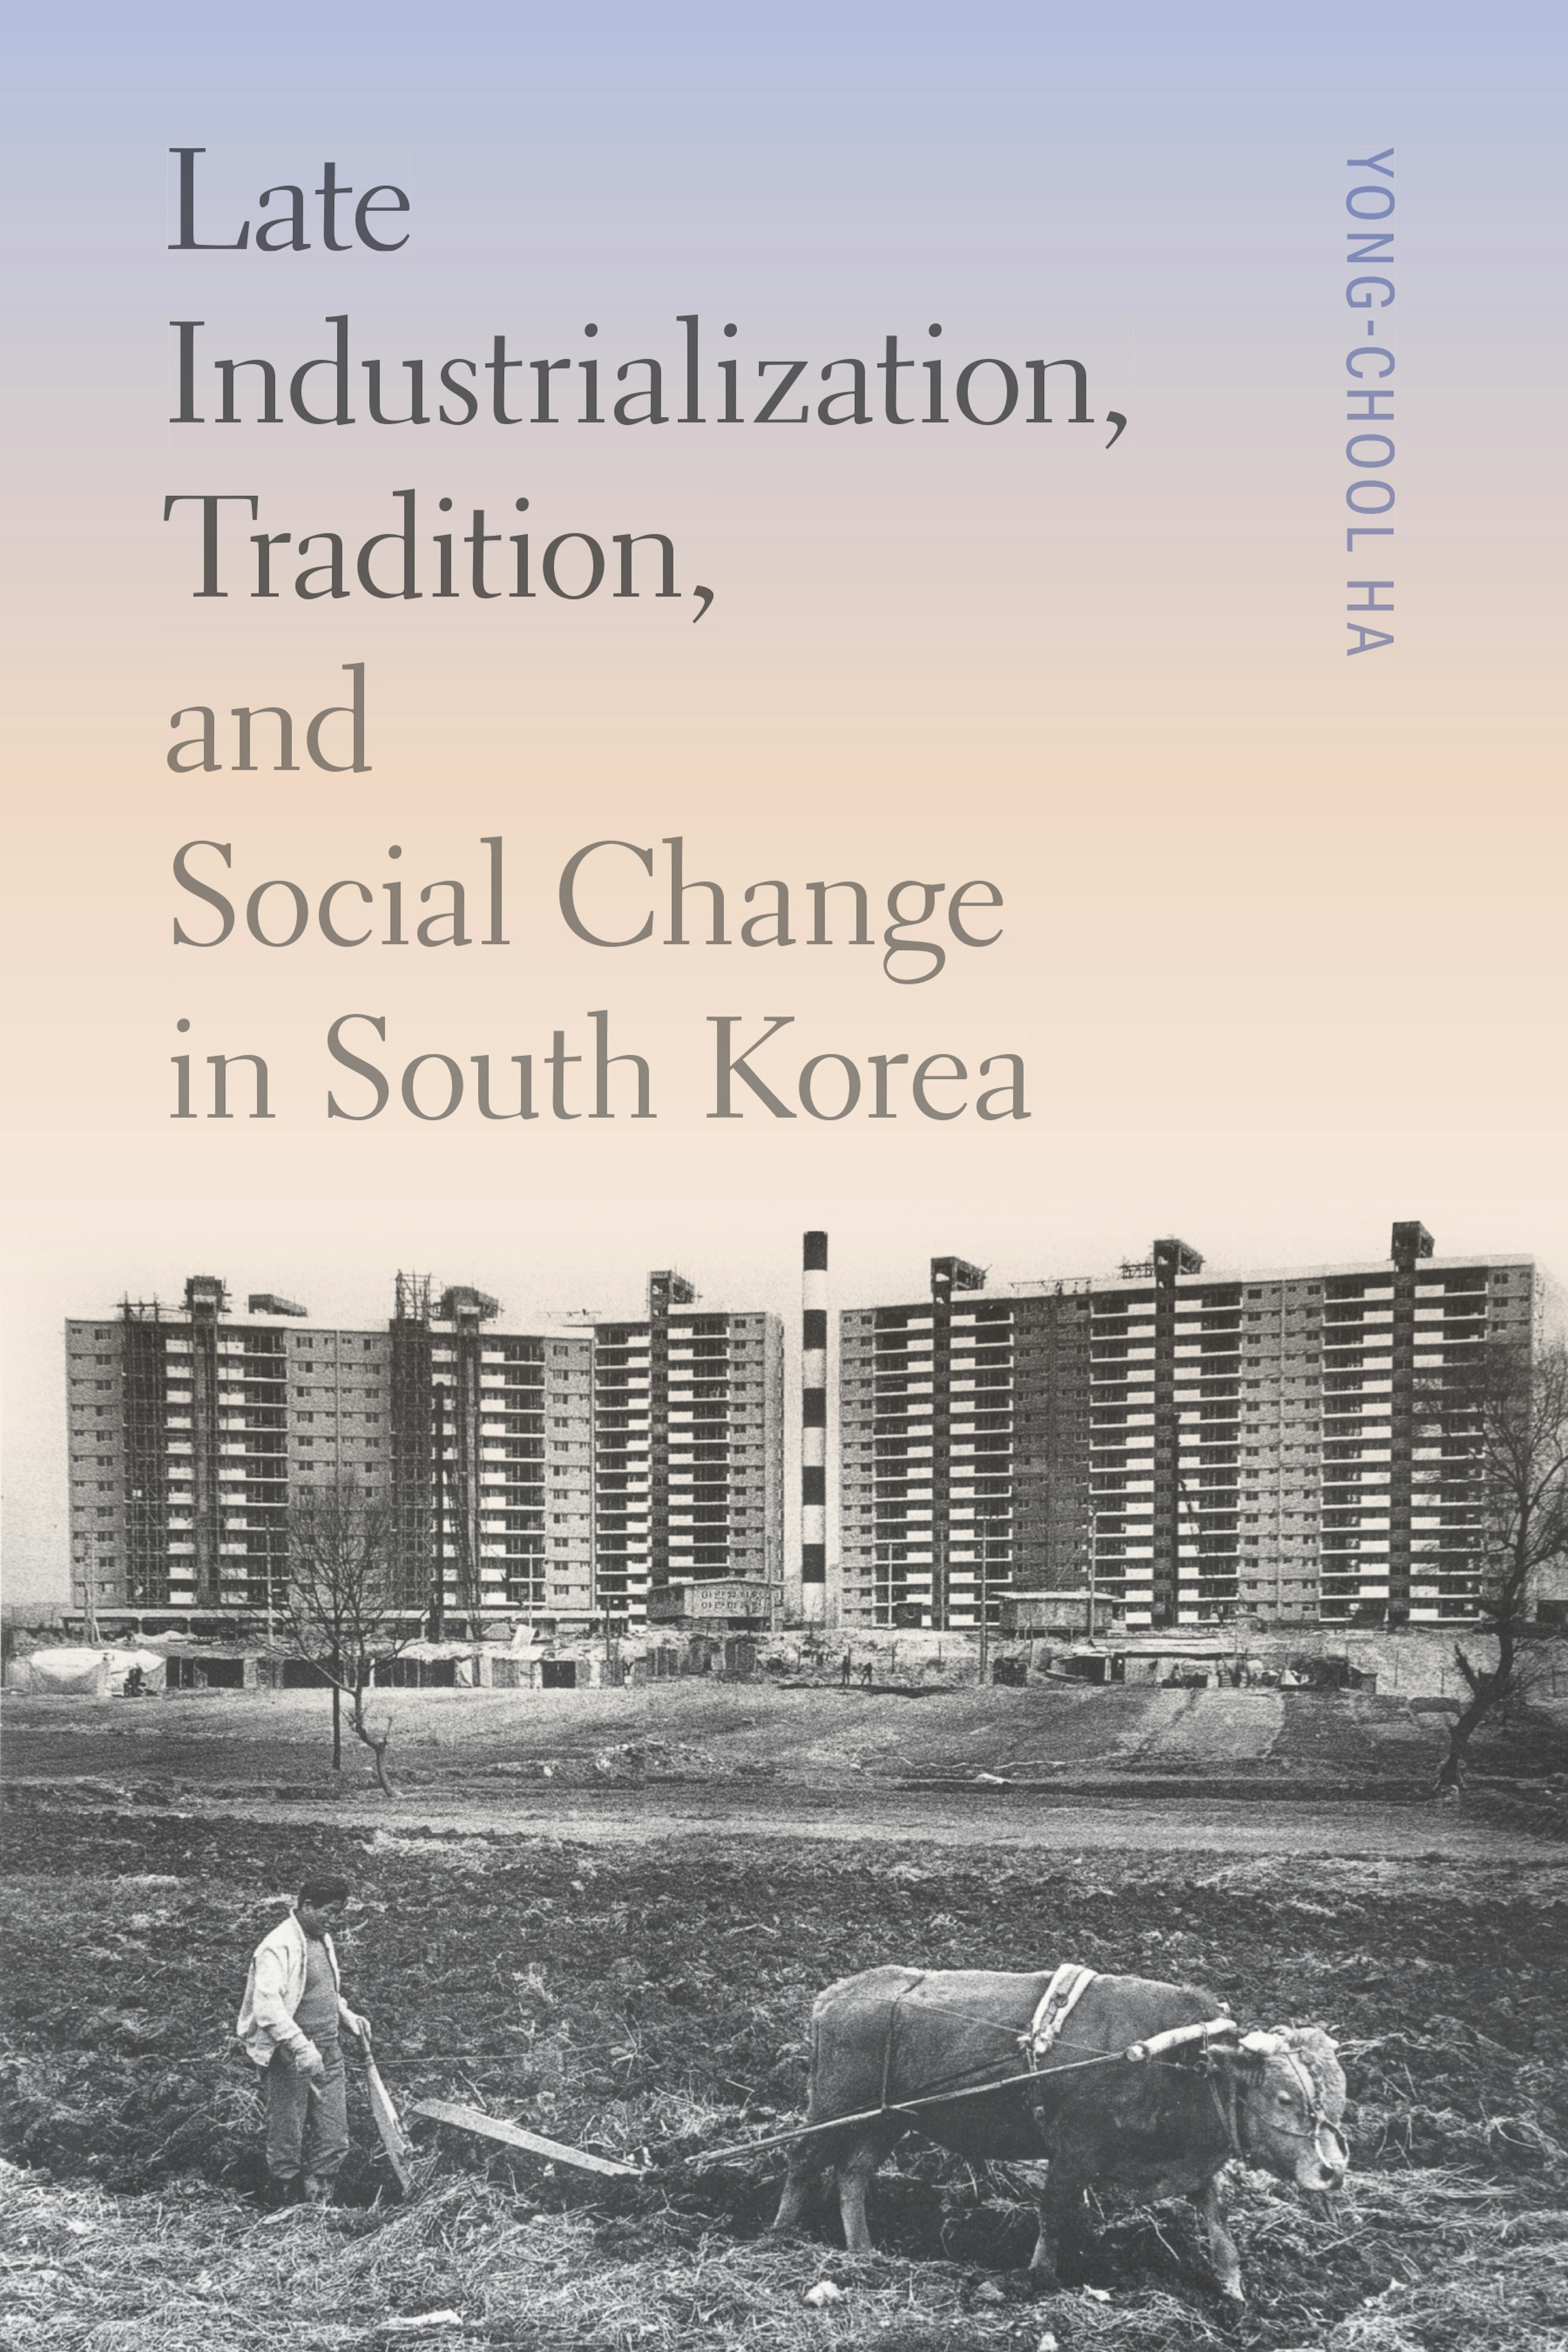 Late Industrialization, Tradition, and Social Change in South Korea